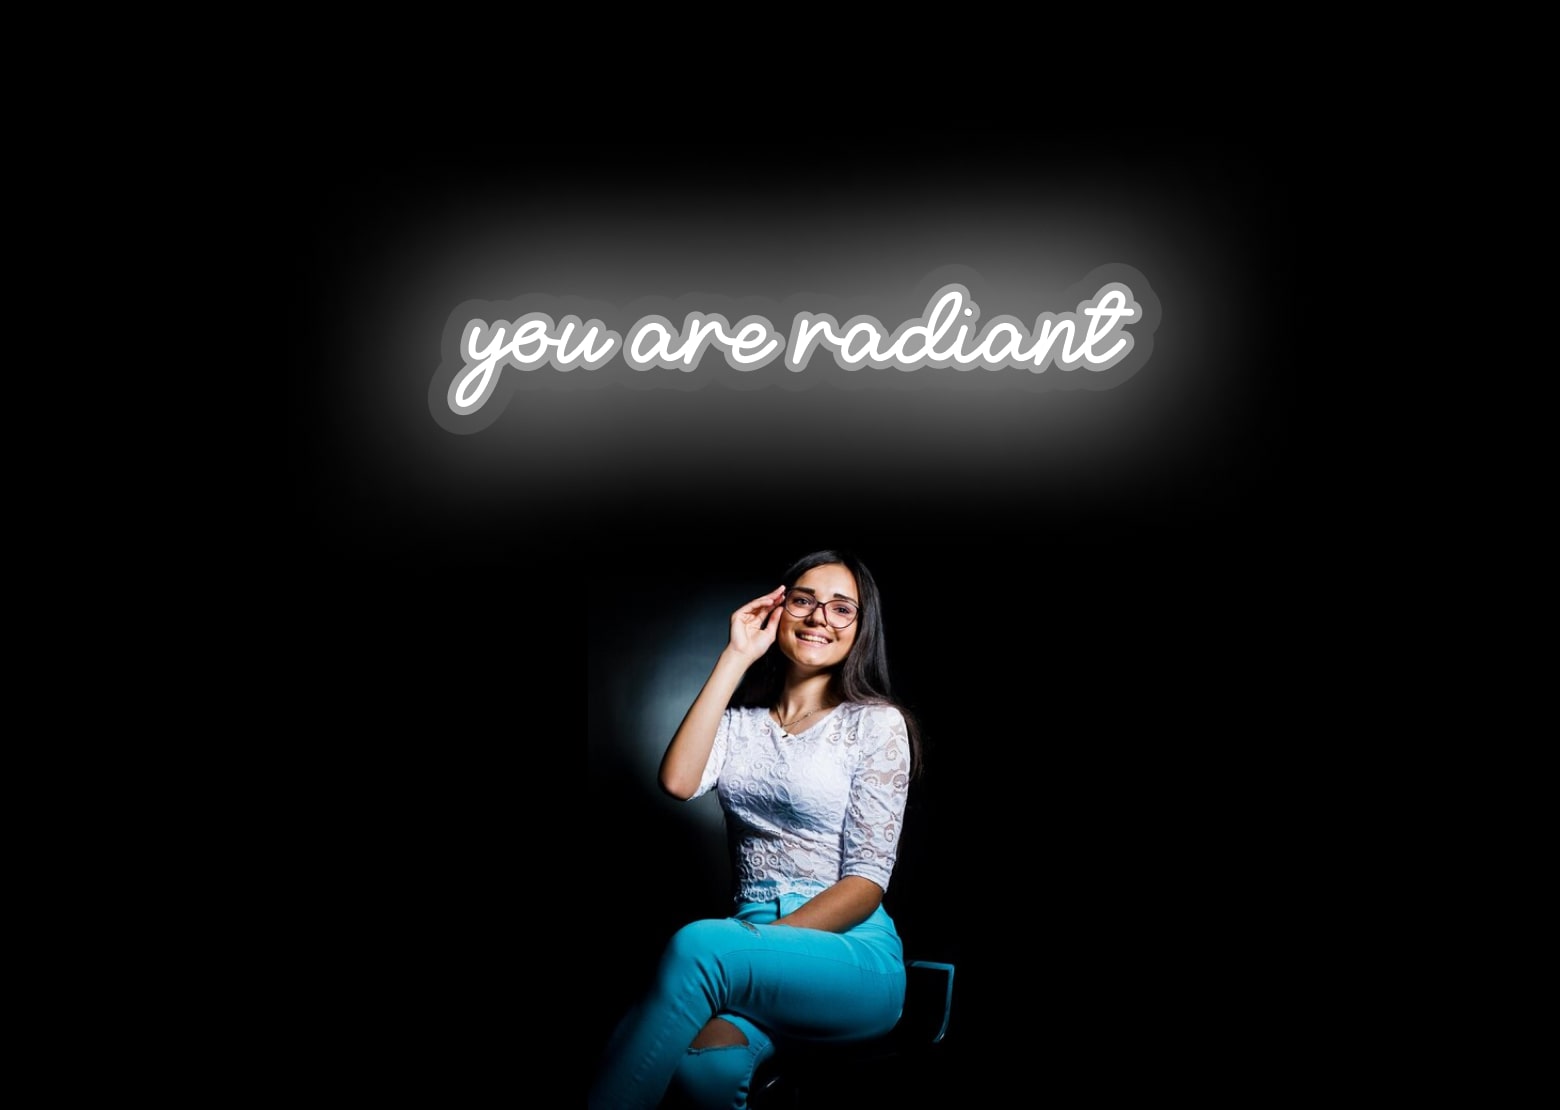 You are radiant White Neon Sign Self Motivation | OMG Neon